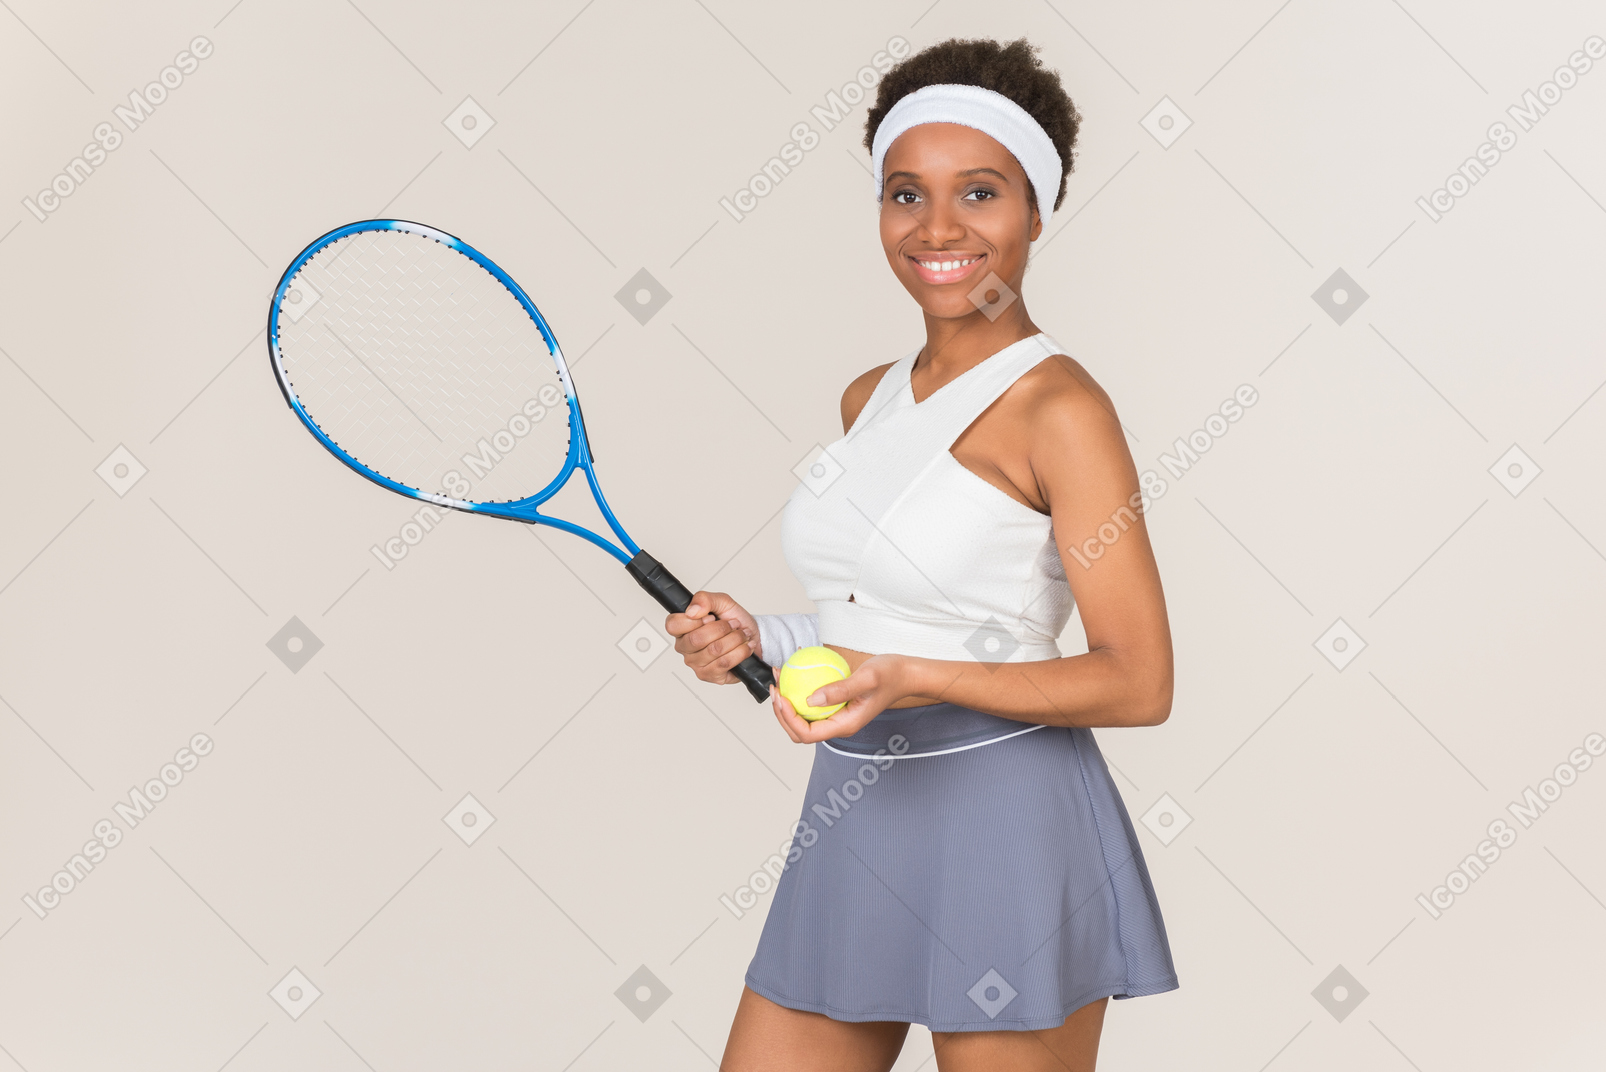 'cause tennis is really my sport